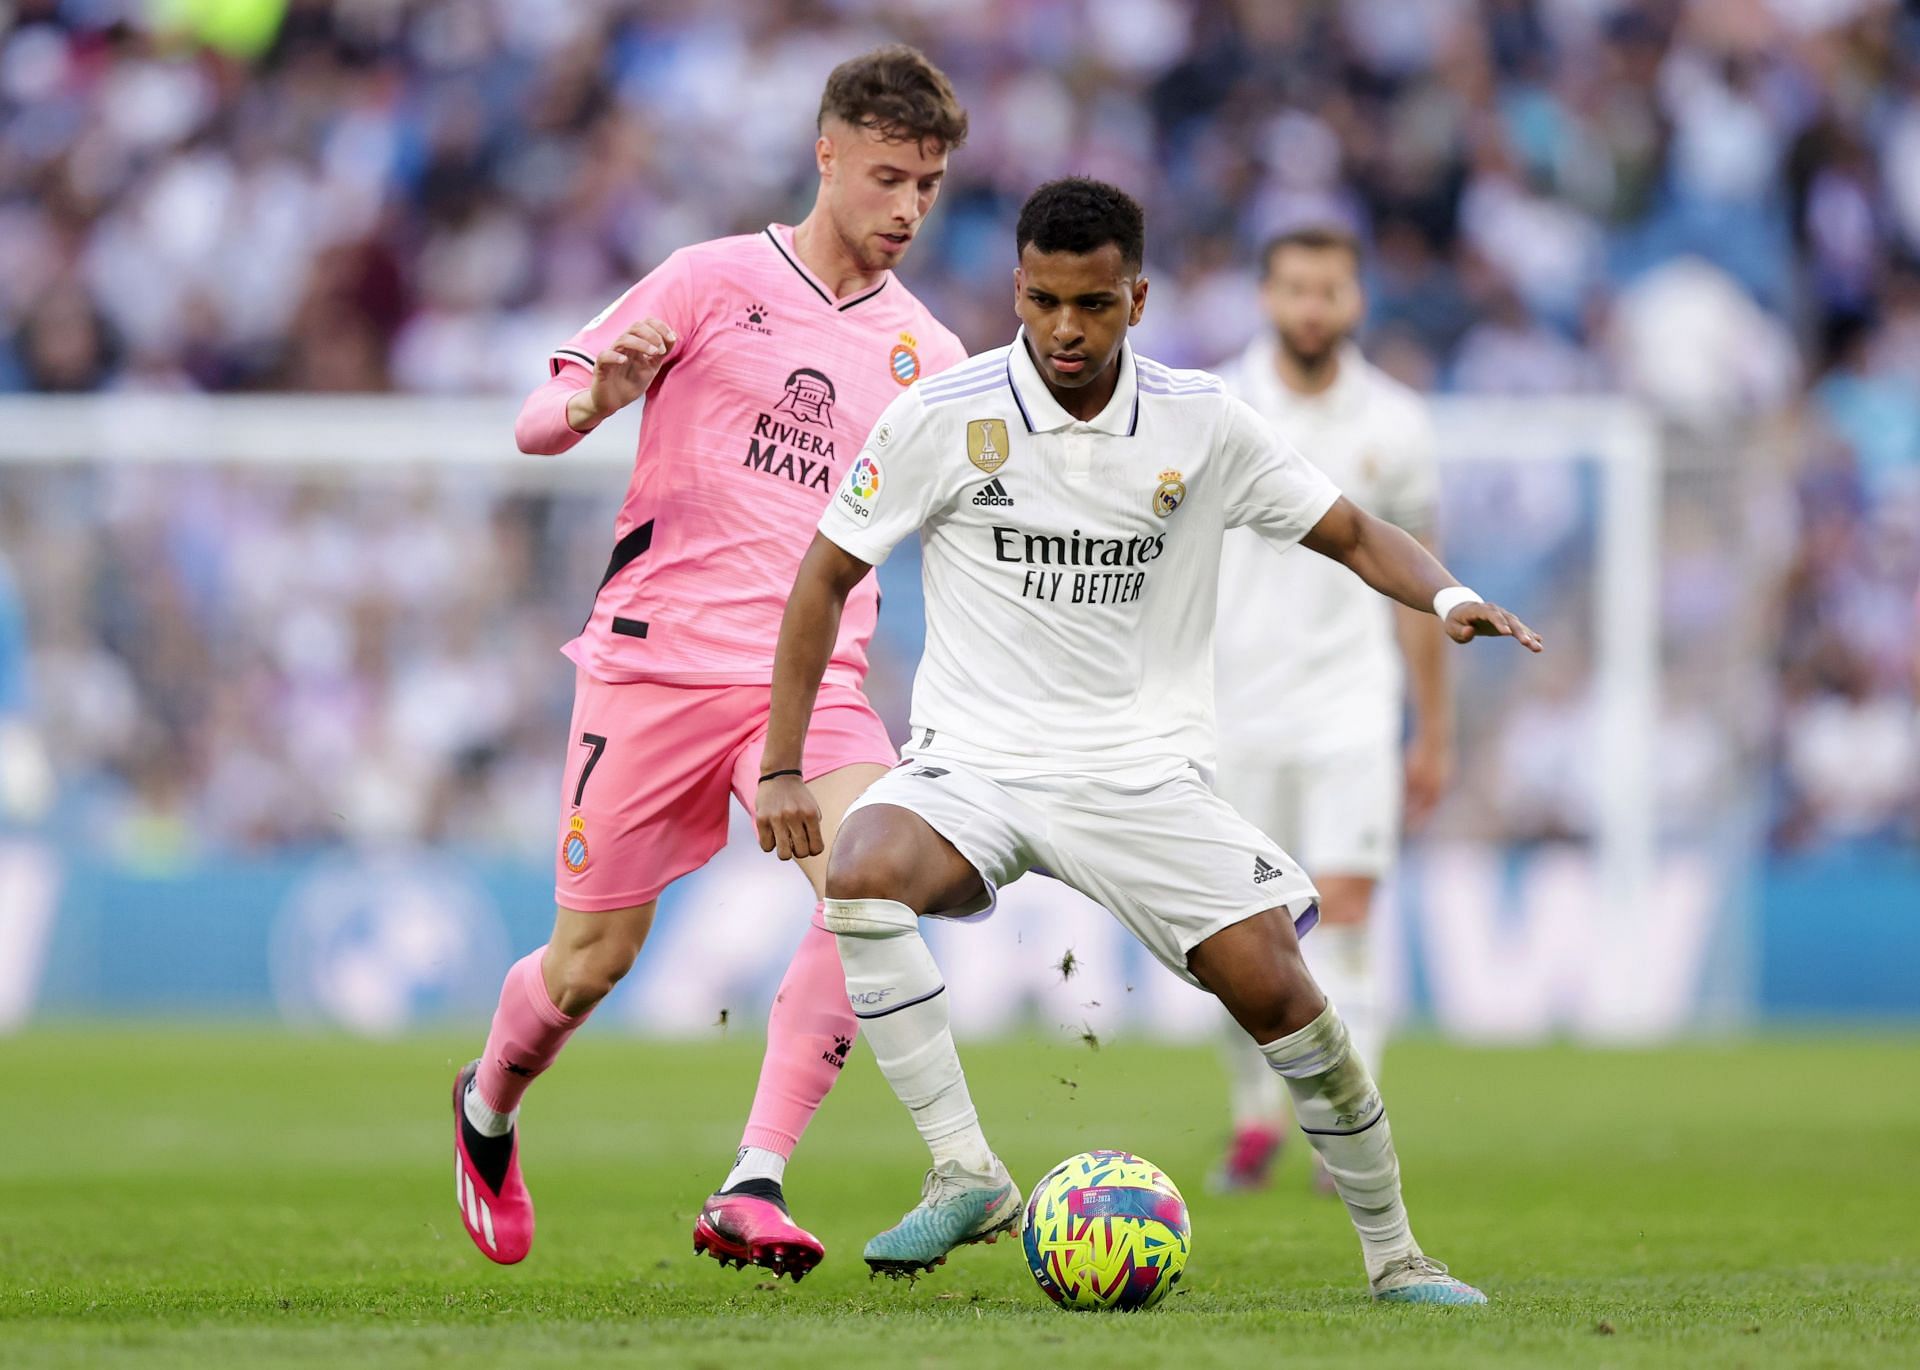 Rodrygo Goes has been in and out of the team this season.